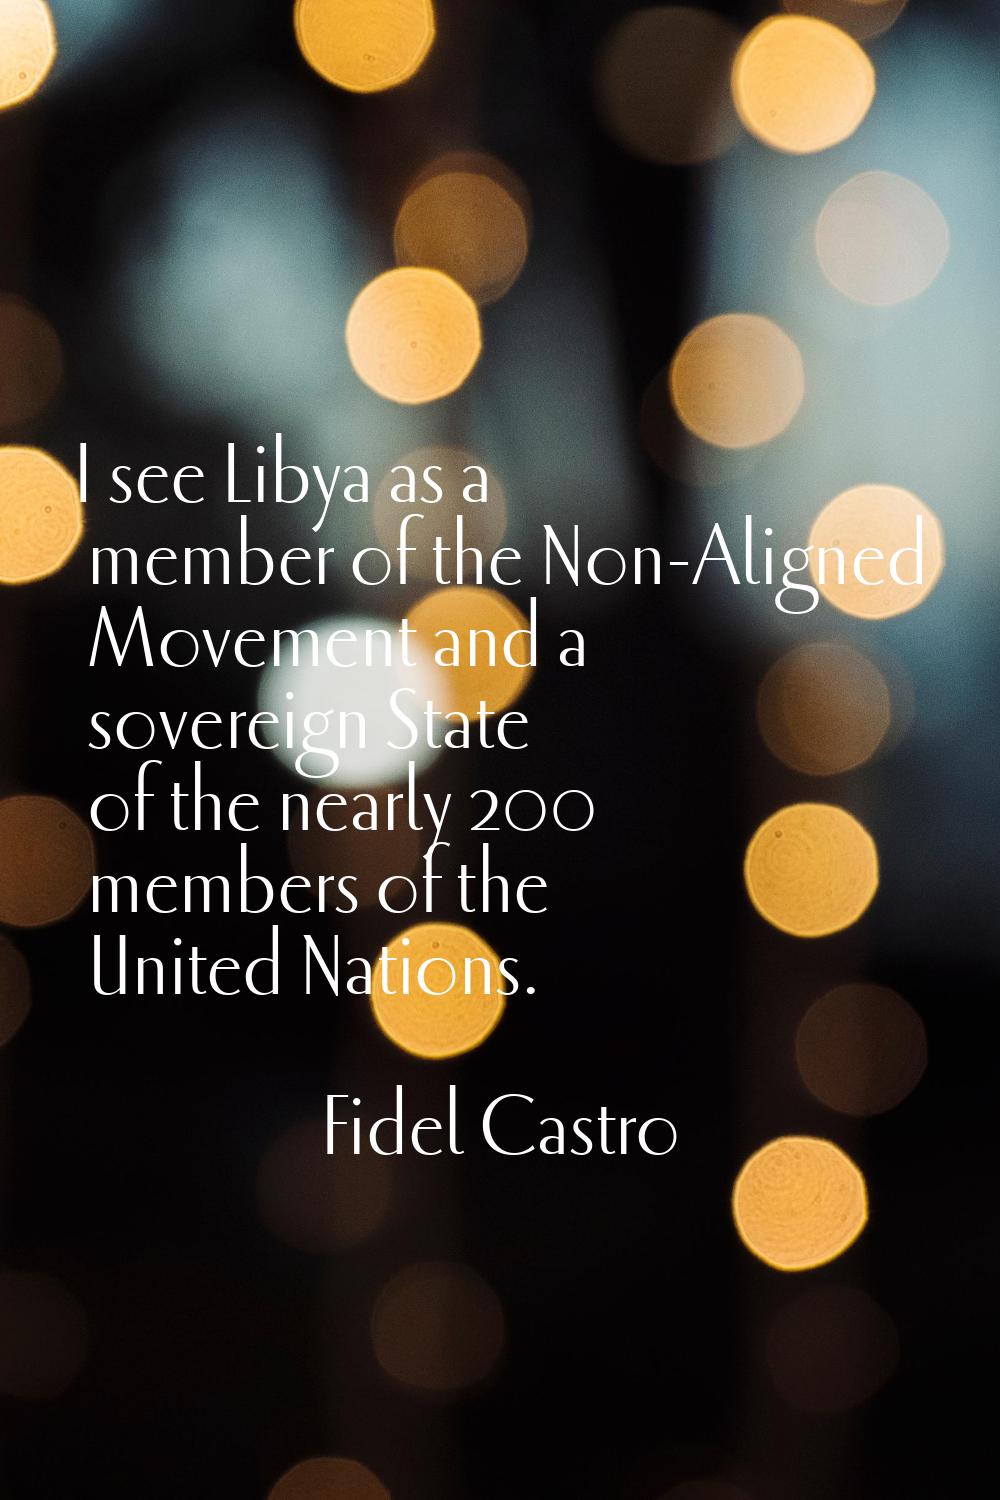 I see Libya as a member of the Non-Aligned Movement and a sovereign State of the nearly 200 members